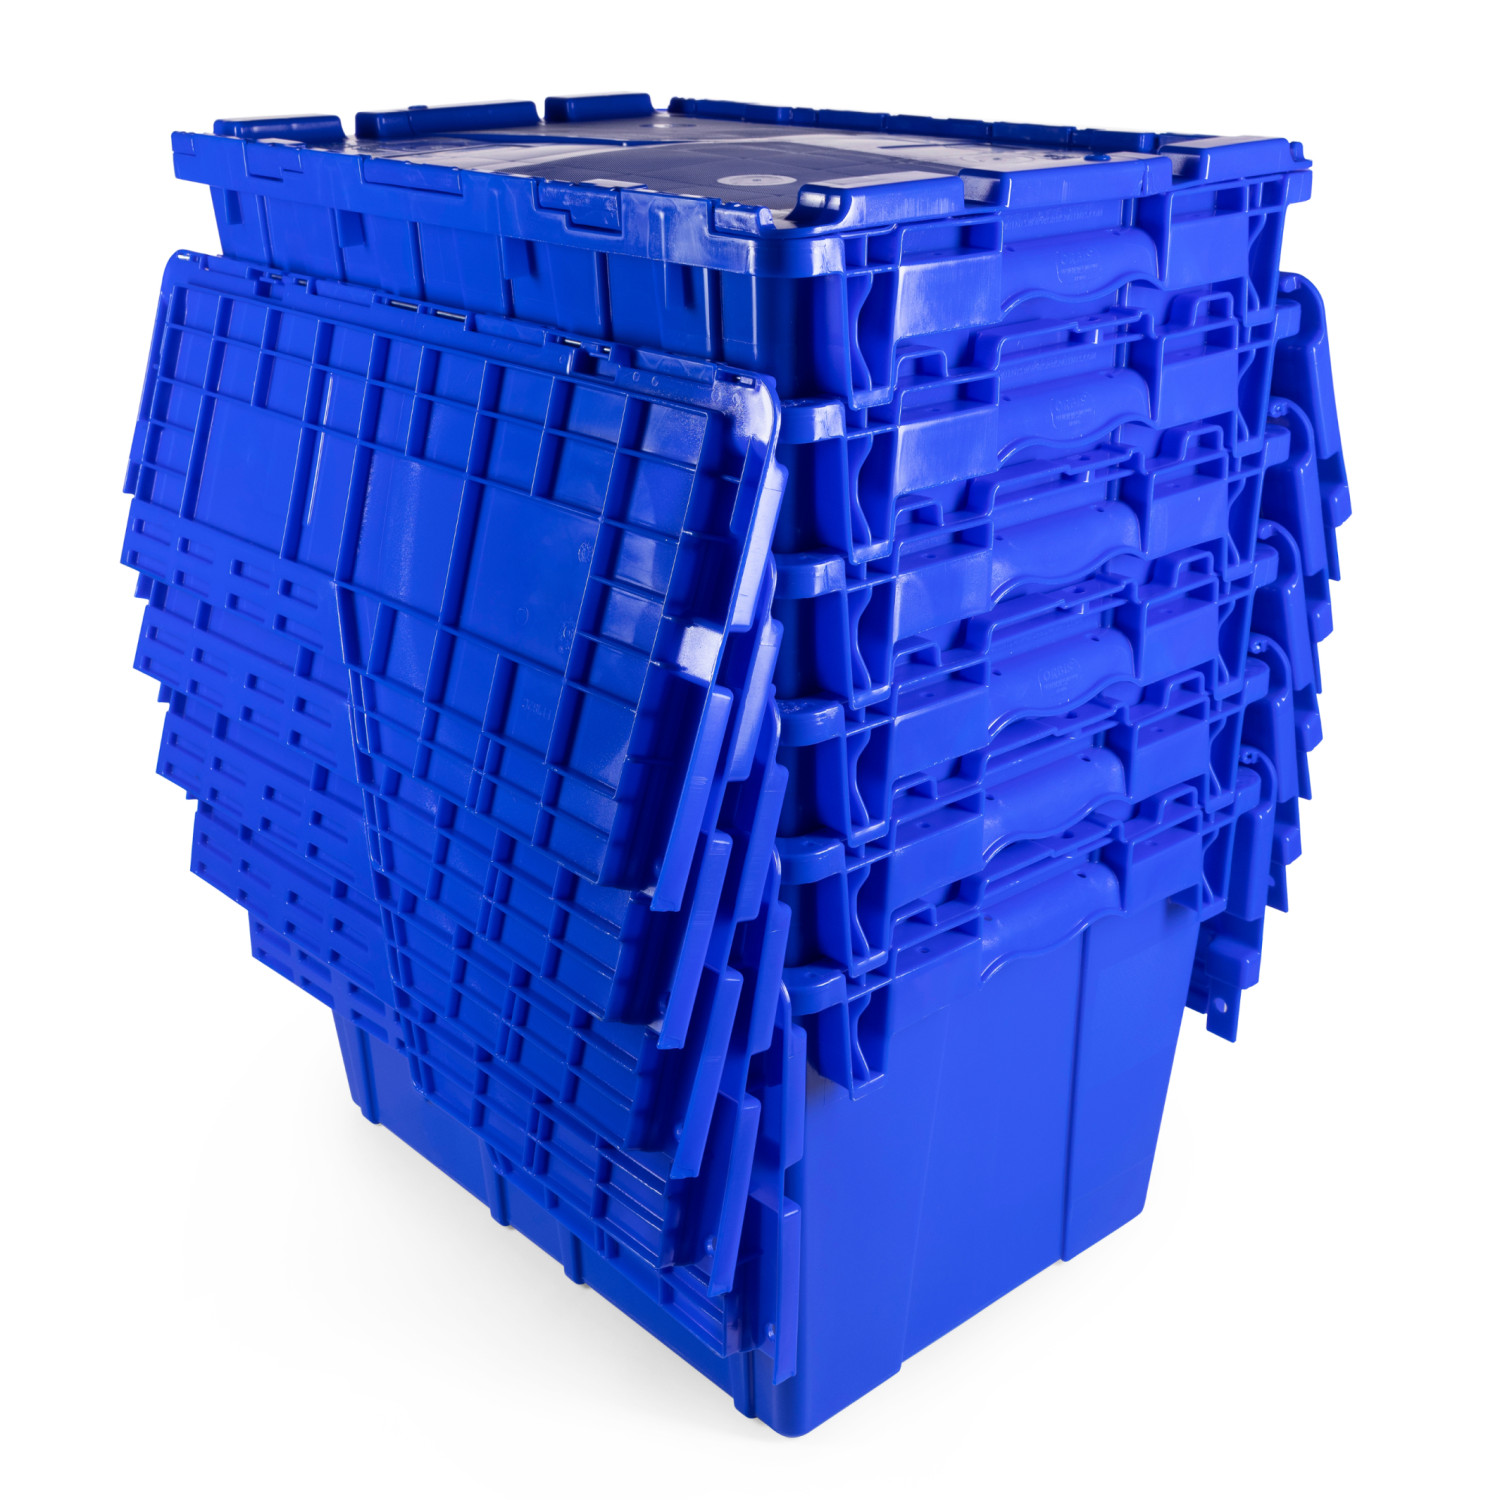 https://idlpack.com/image/cache/catalog/Products/Containers/2000x2000%20Blue%20Plastic%20Box%2021.5x15x12_white_bg%206-1500x1500.jpg